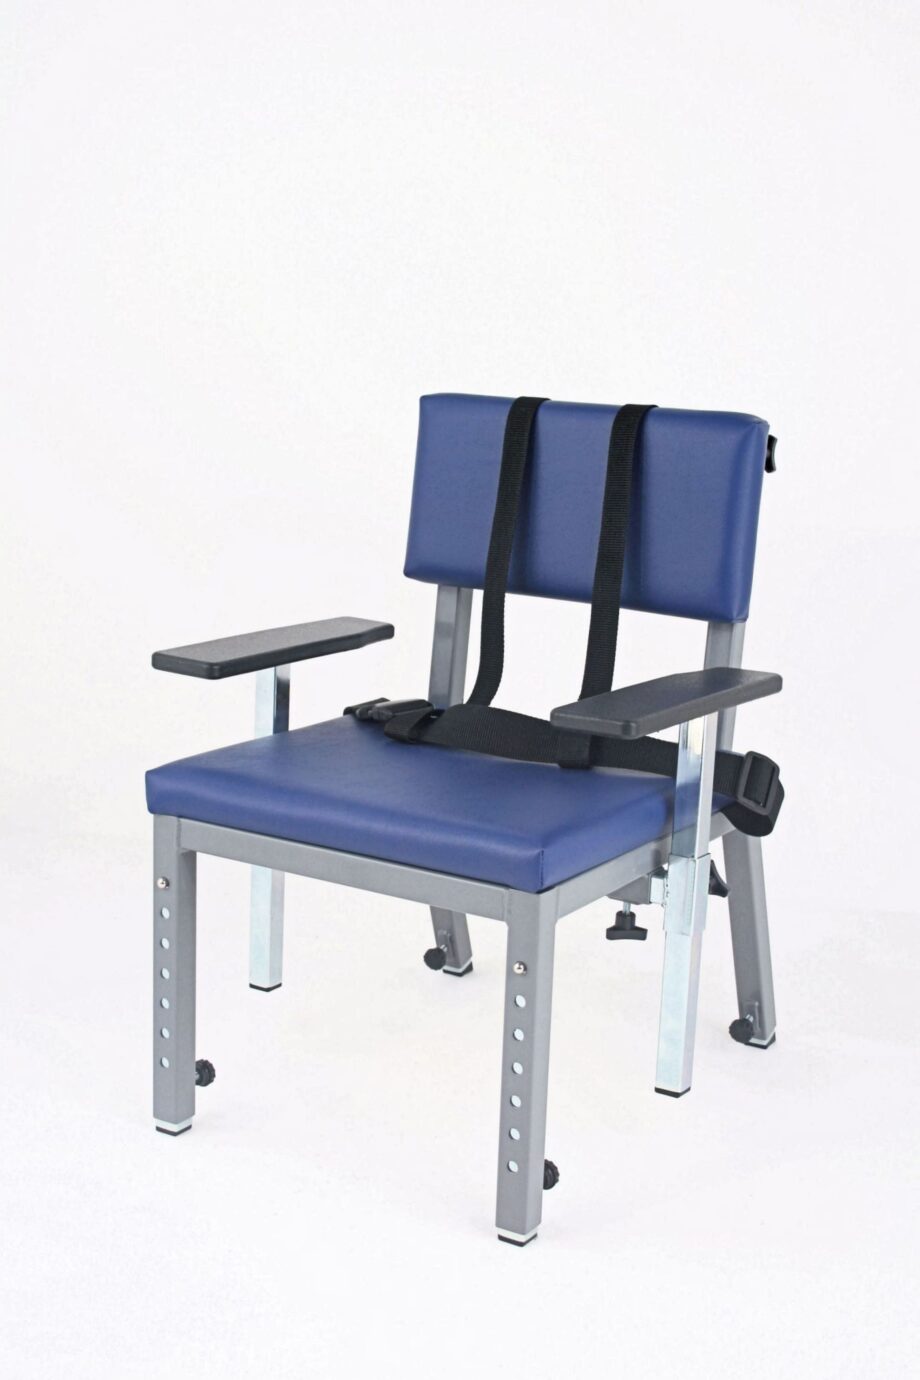 Base Chair and Optional Straps